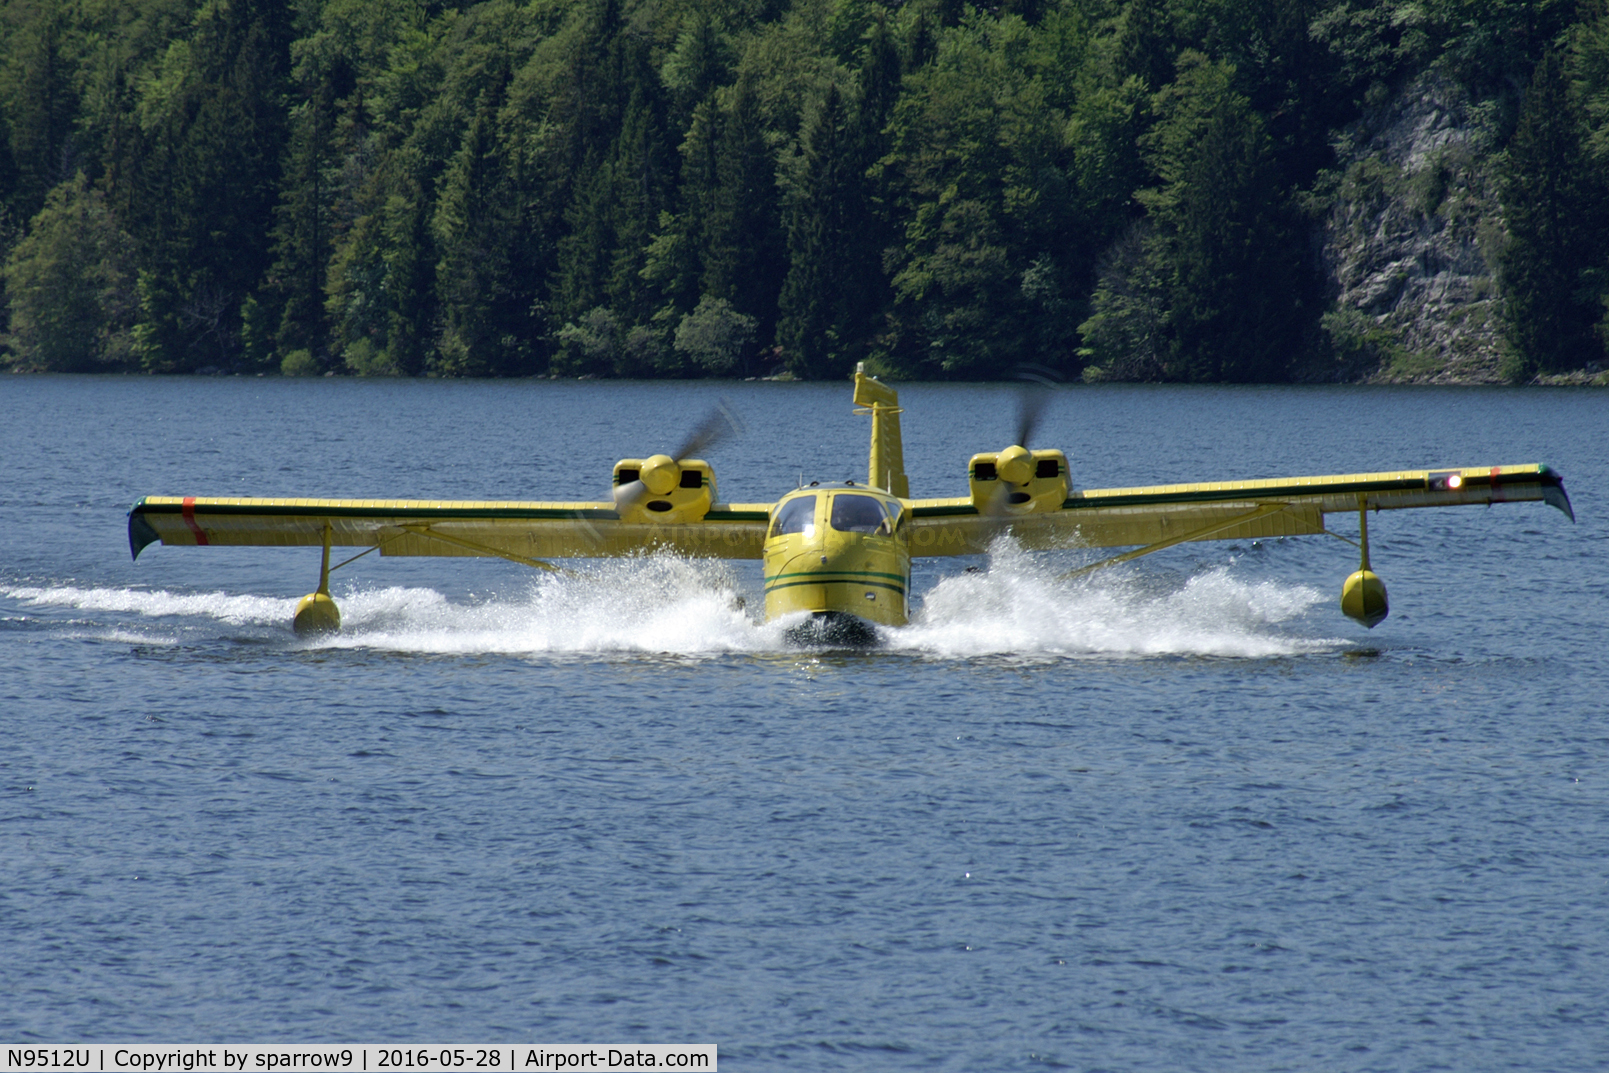 N9512U, 1976 STOL Aircraft UC-1 Twin Bee C/N 018, Former HB-LSK, again with its former registration since 2016-04-21, coming back from a flight to L'Abbaye on the Lac de Joux in the Swiss Jura